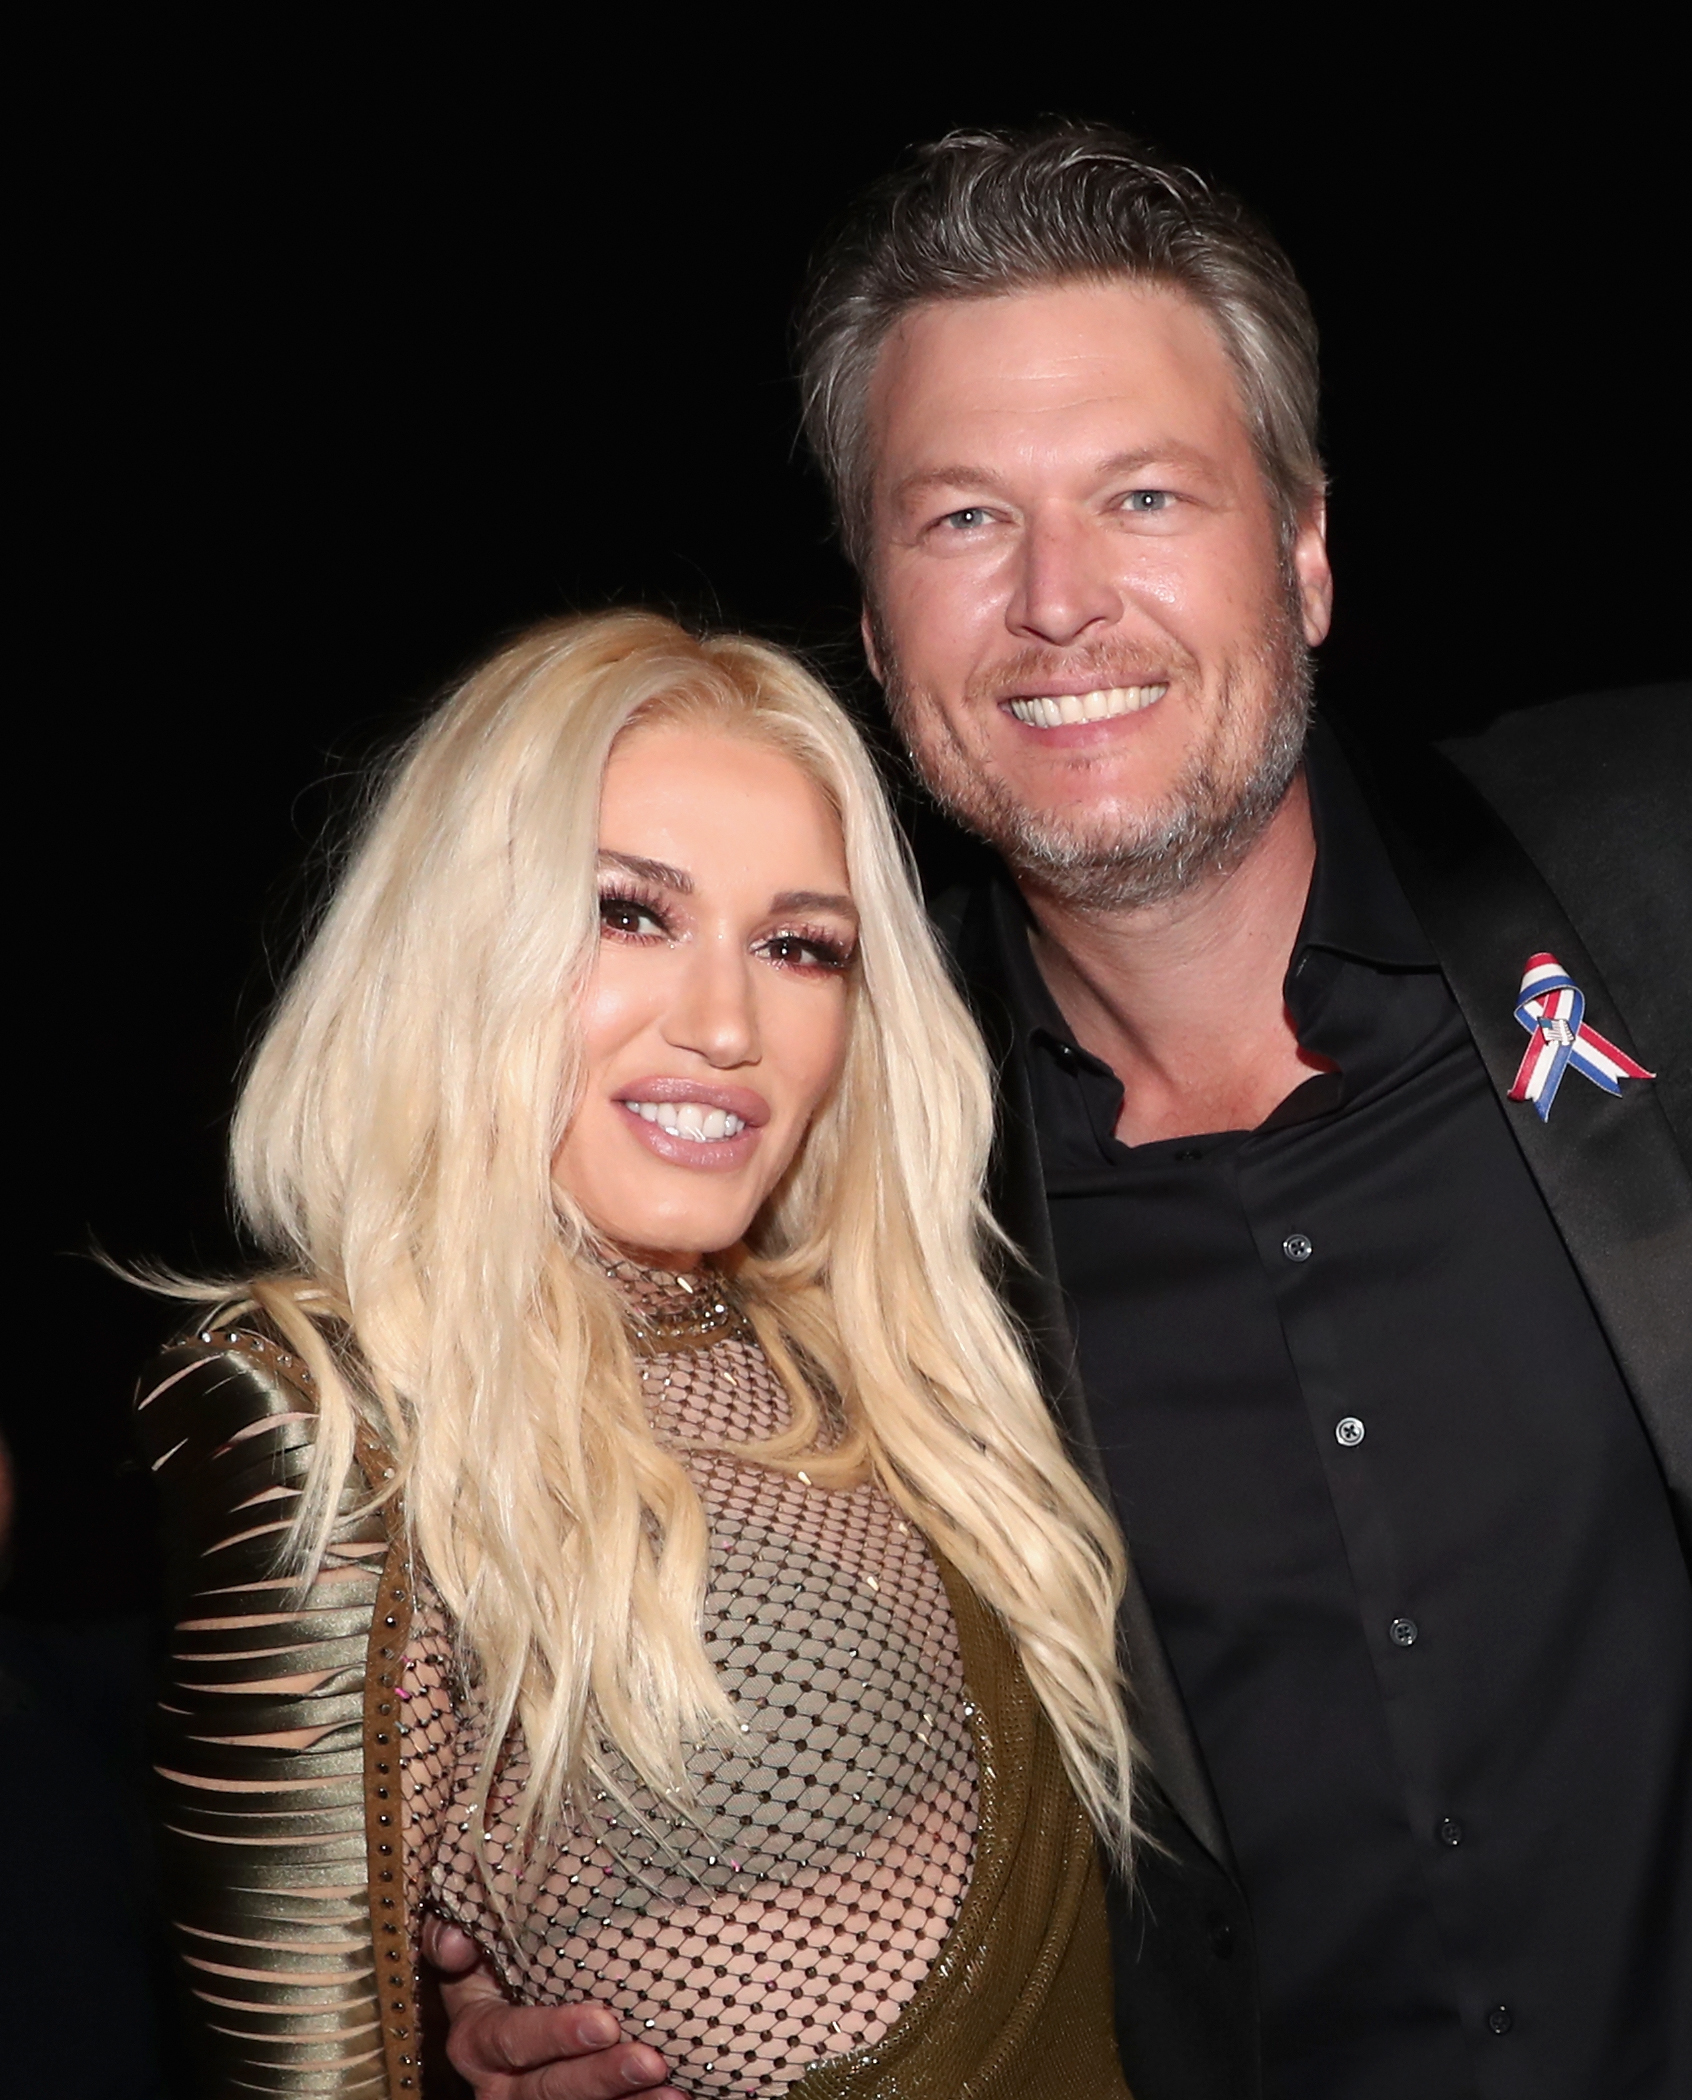 Gwen recently surprised fans when she showed up at one of Blake's concerts